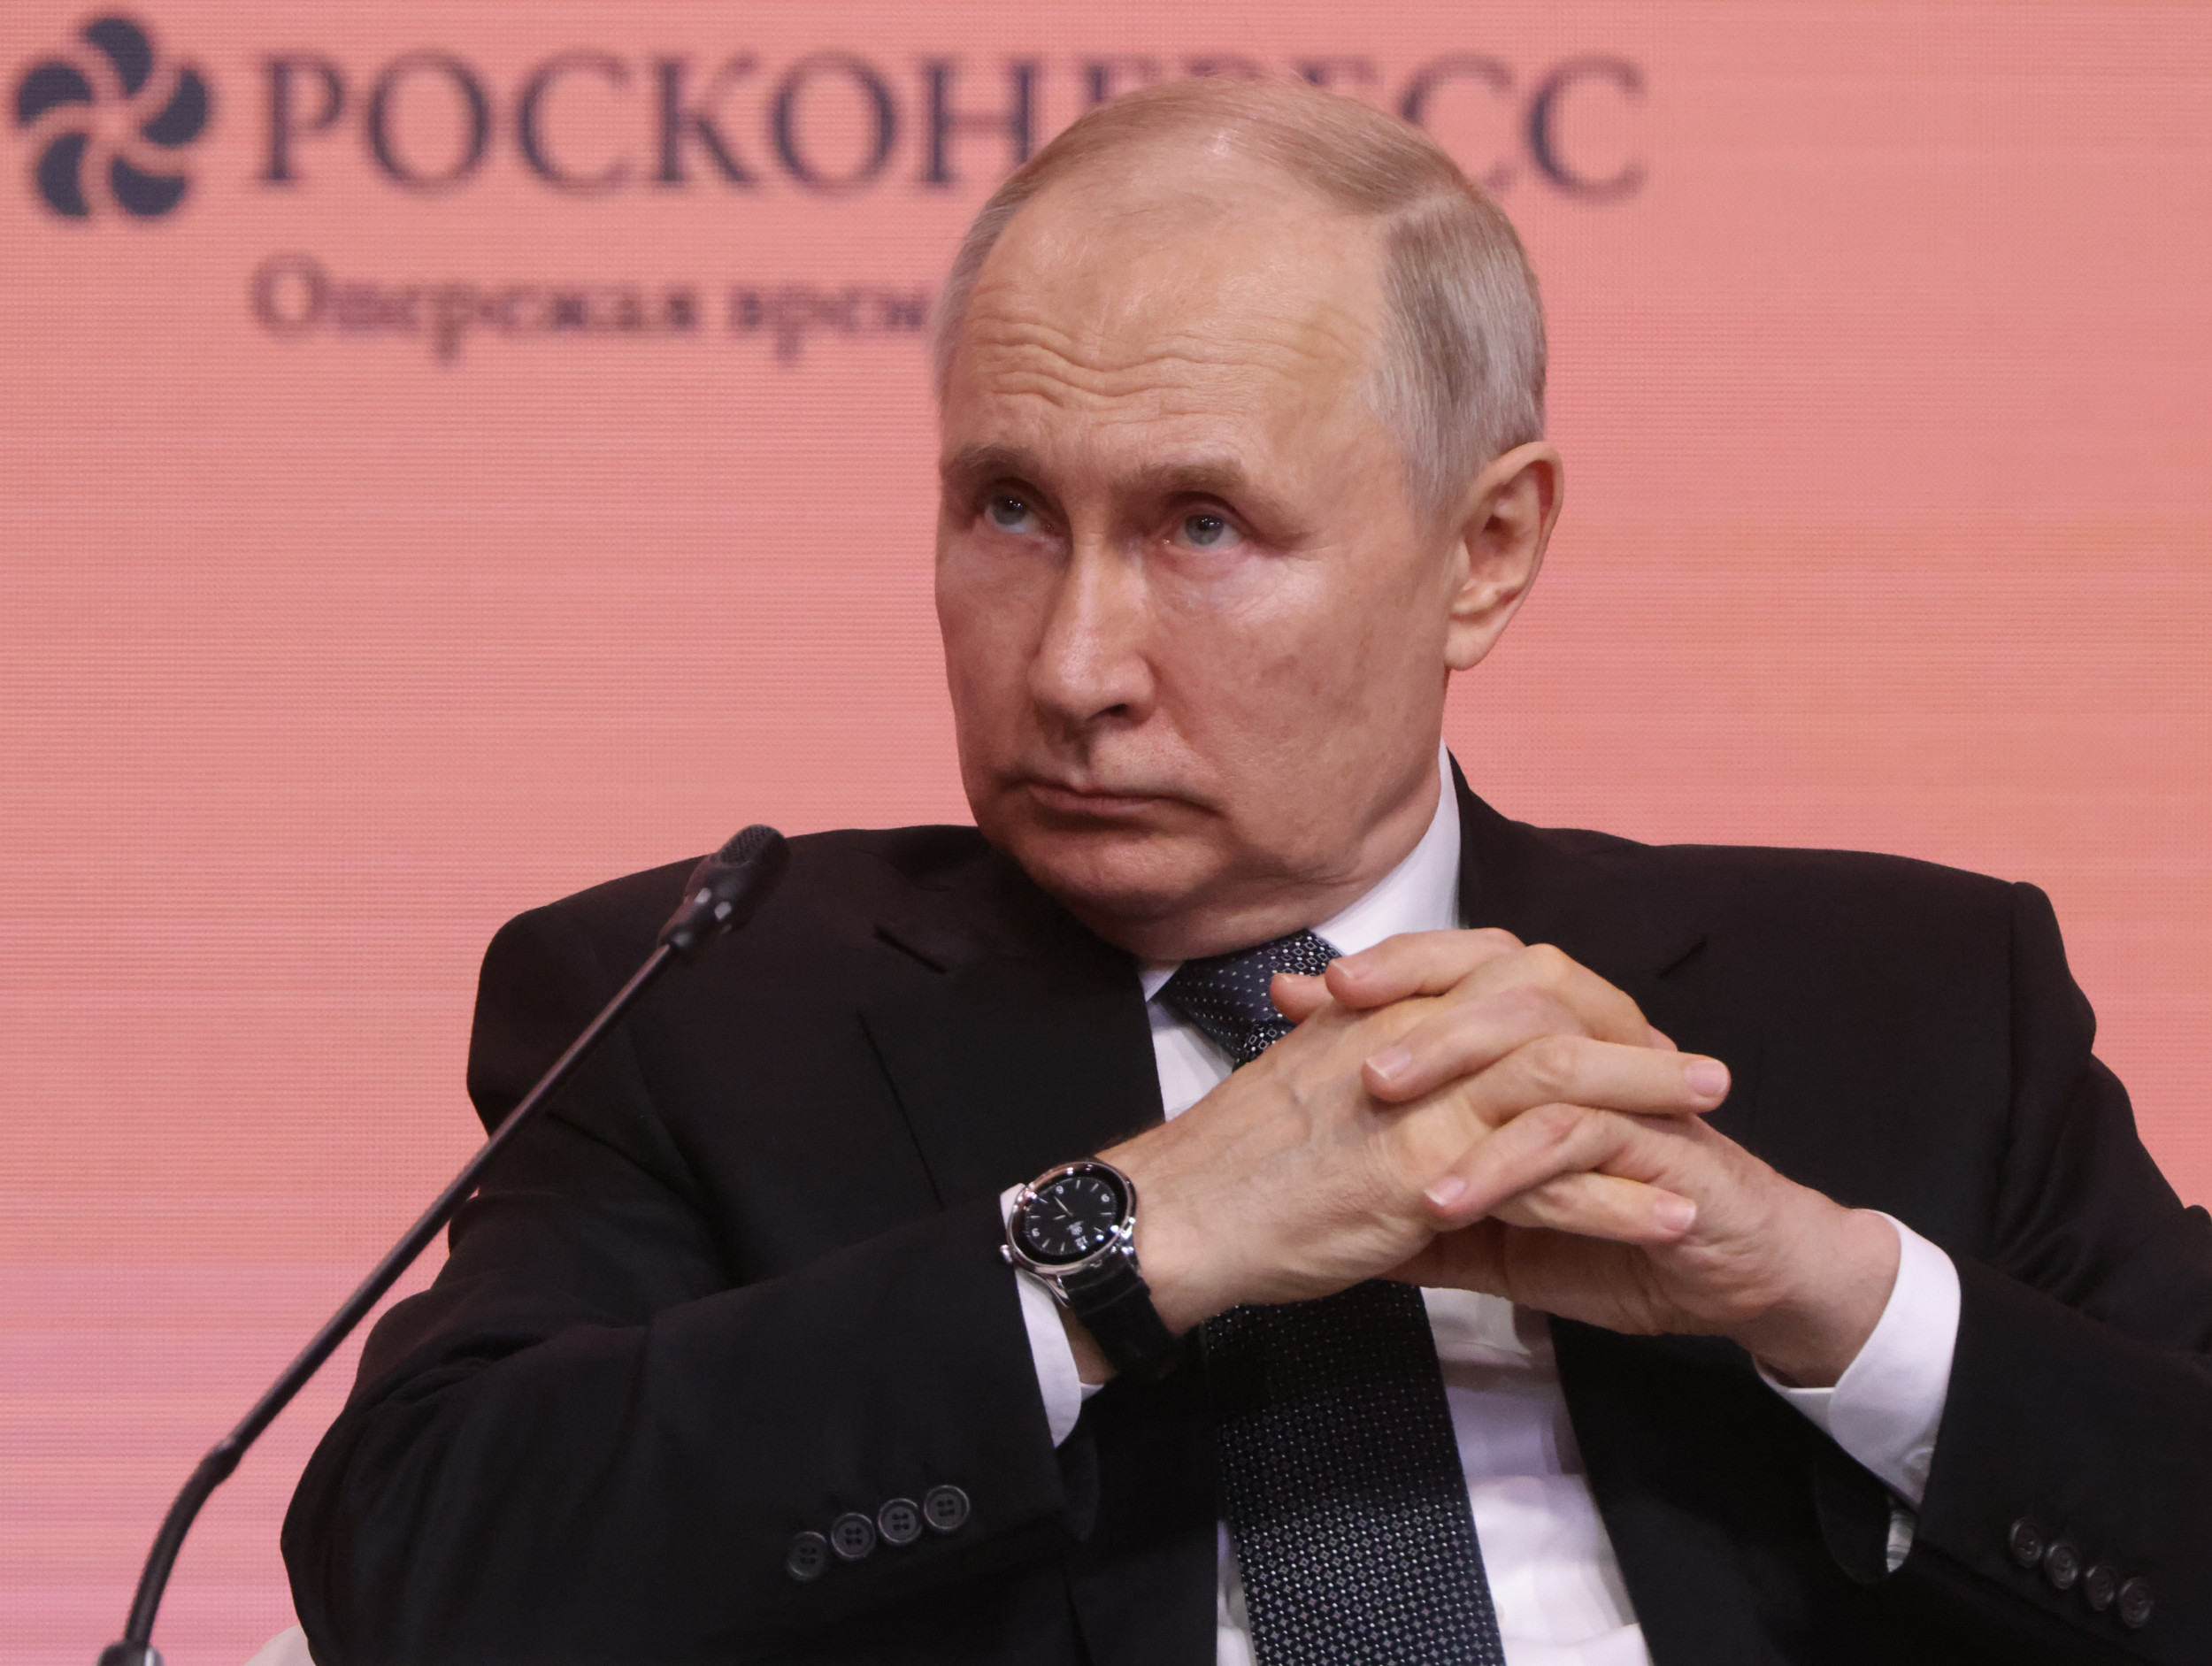 Putin’s charm offensive on Russia